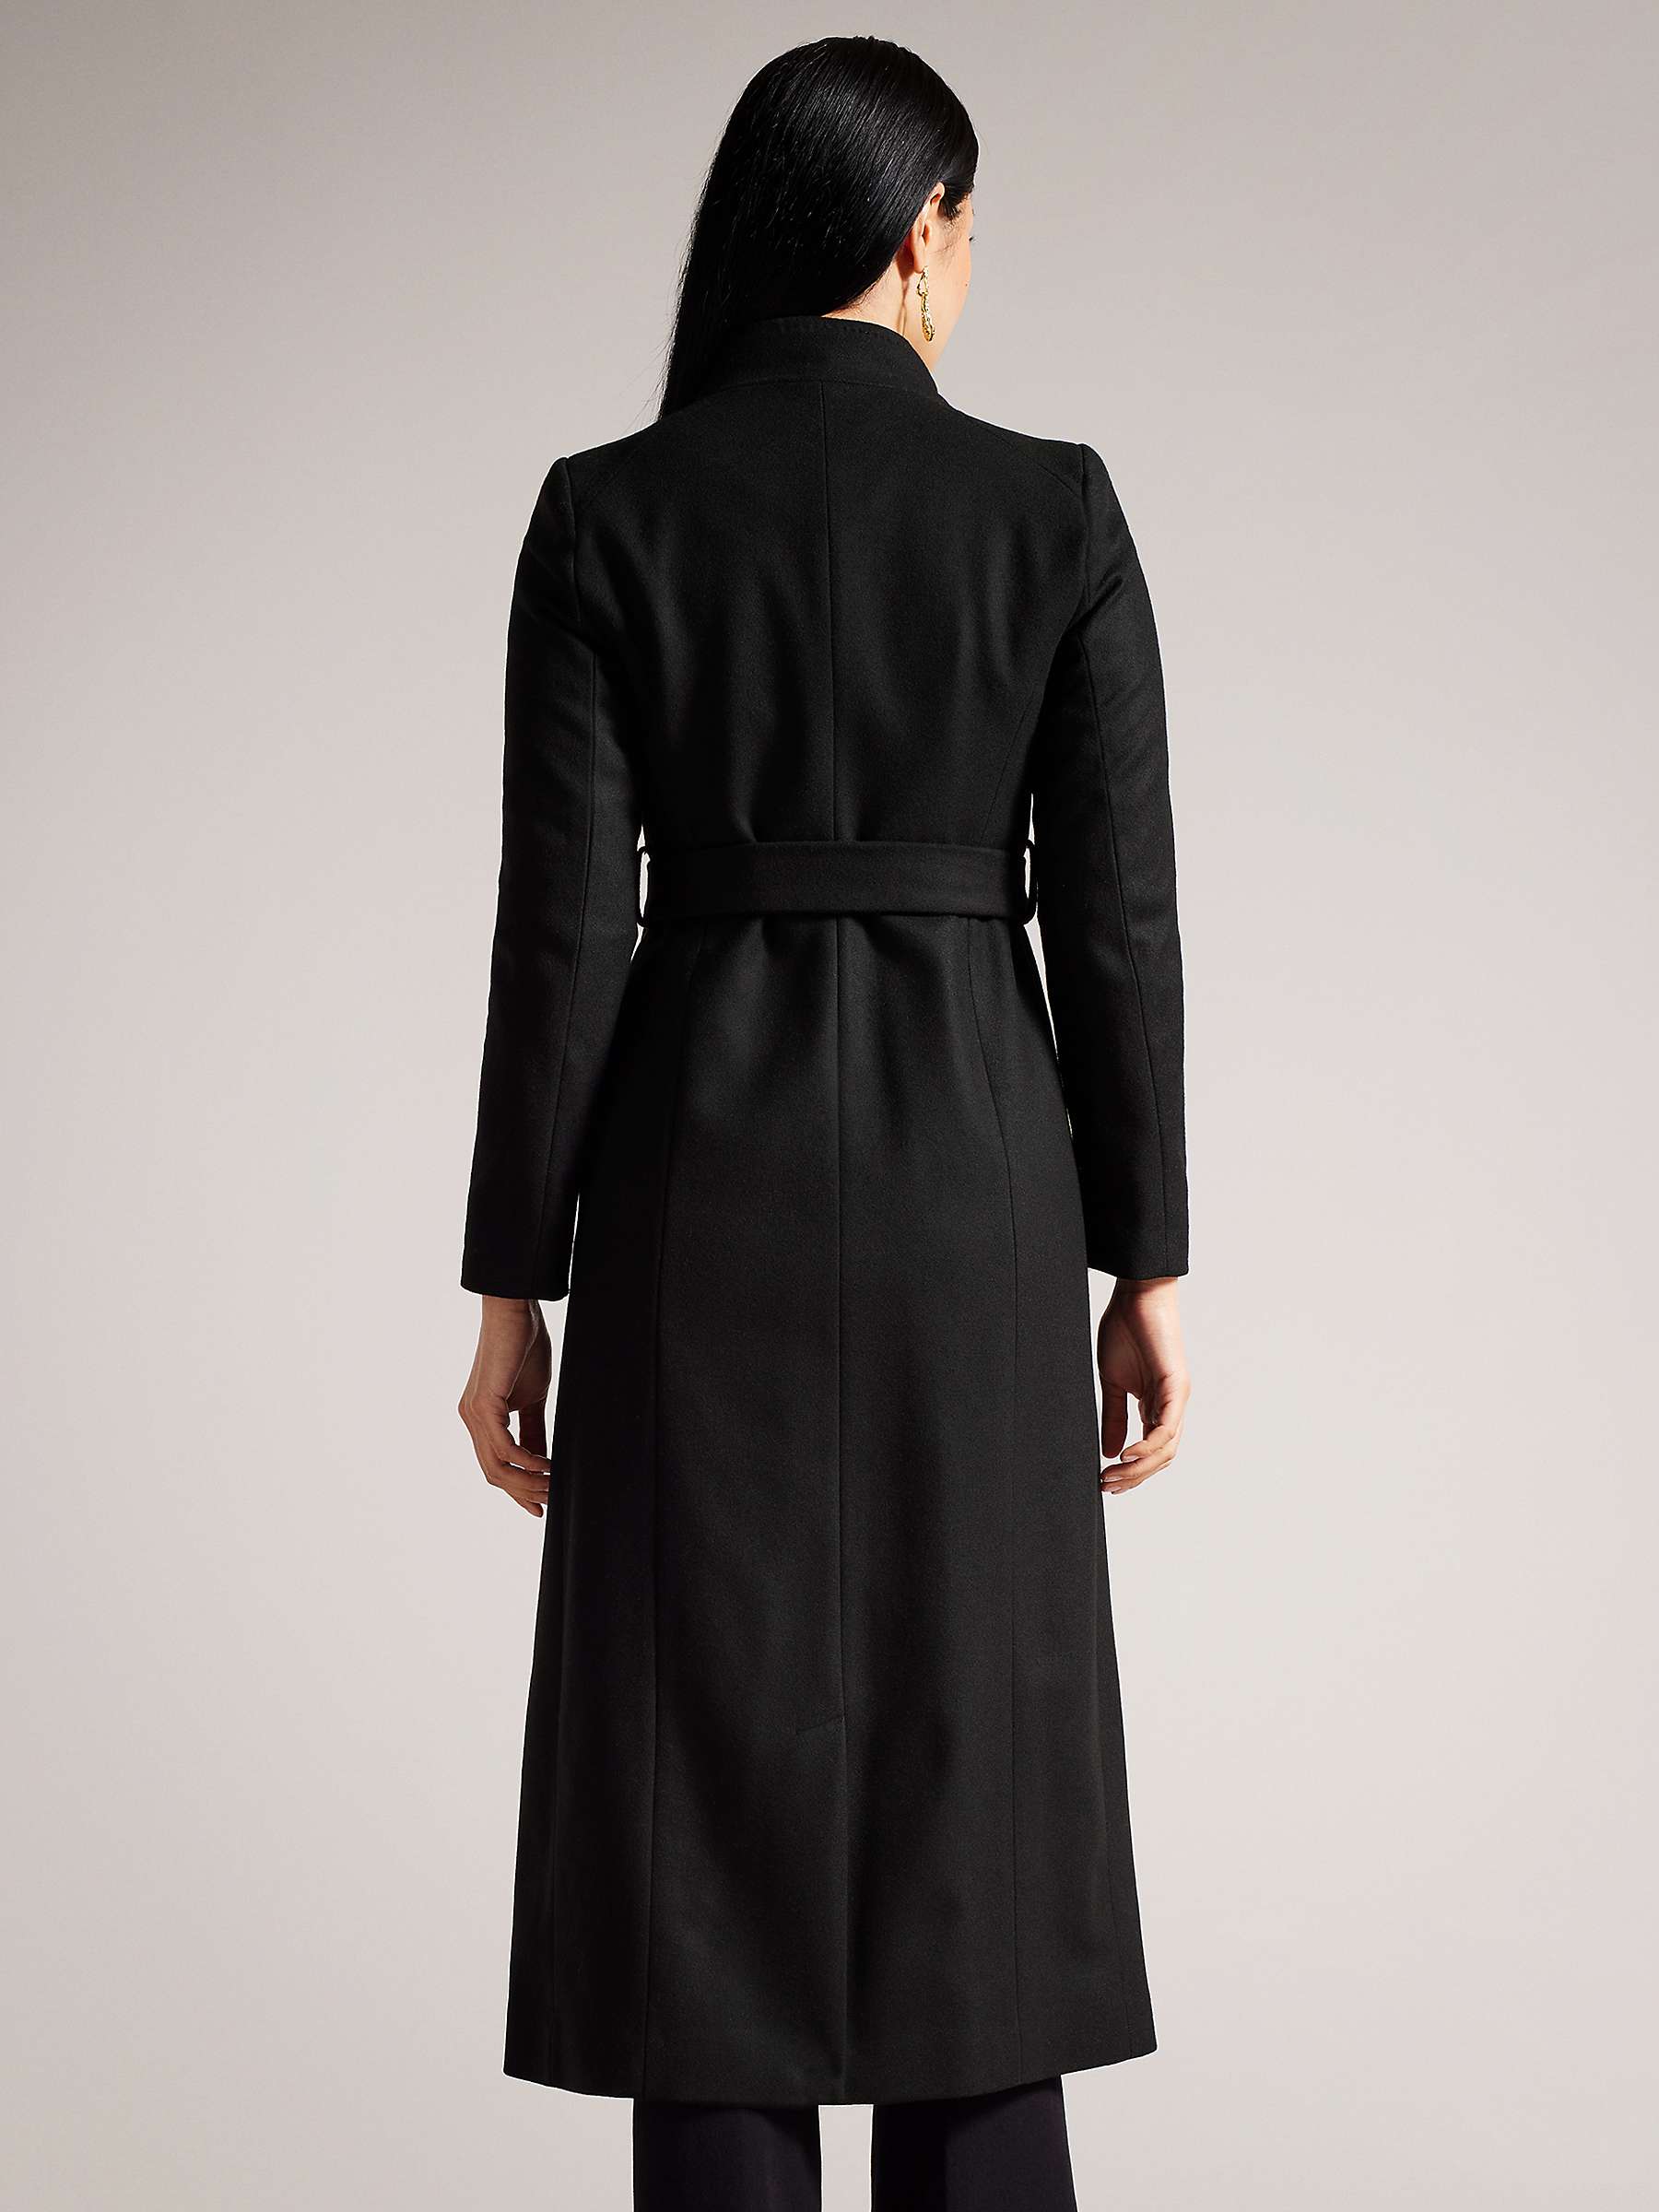 Ted Baker Rosell Wool and Cashmere Blend Long Coat, Black at John Lewis ...